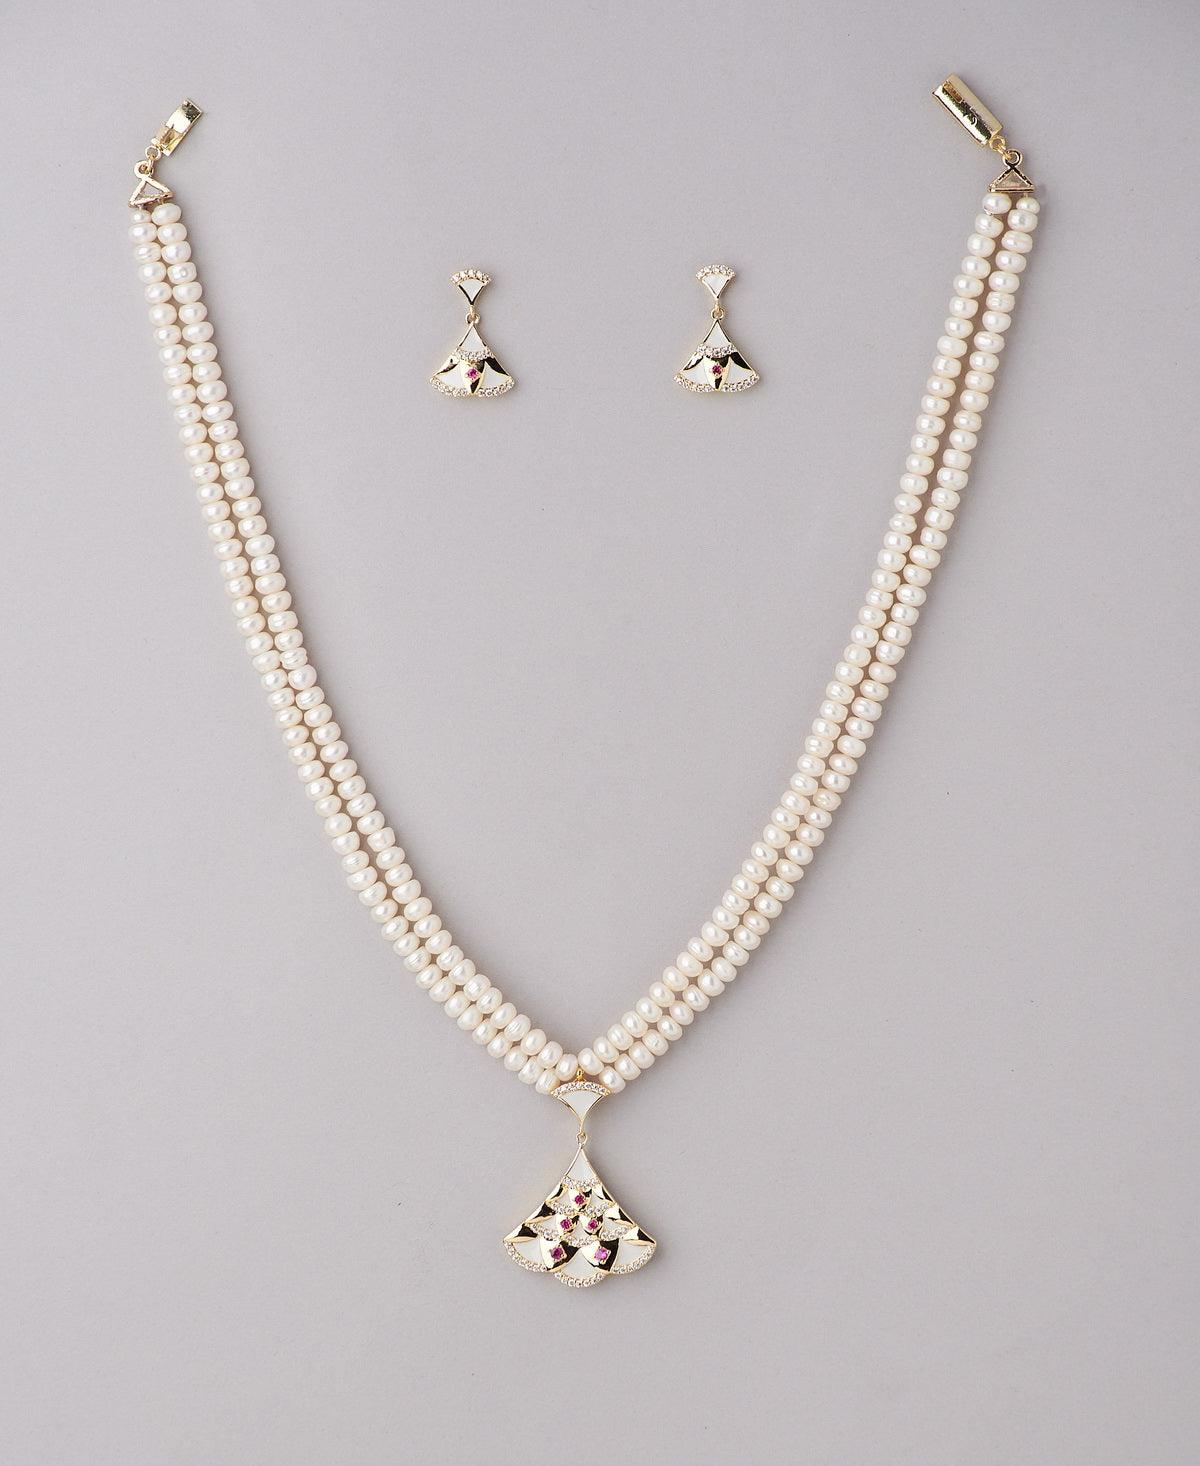 Vintage Stone Studded Pearl Necklace Set - Chandrani Pearls